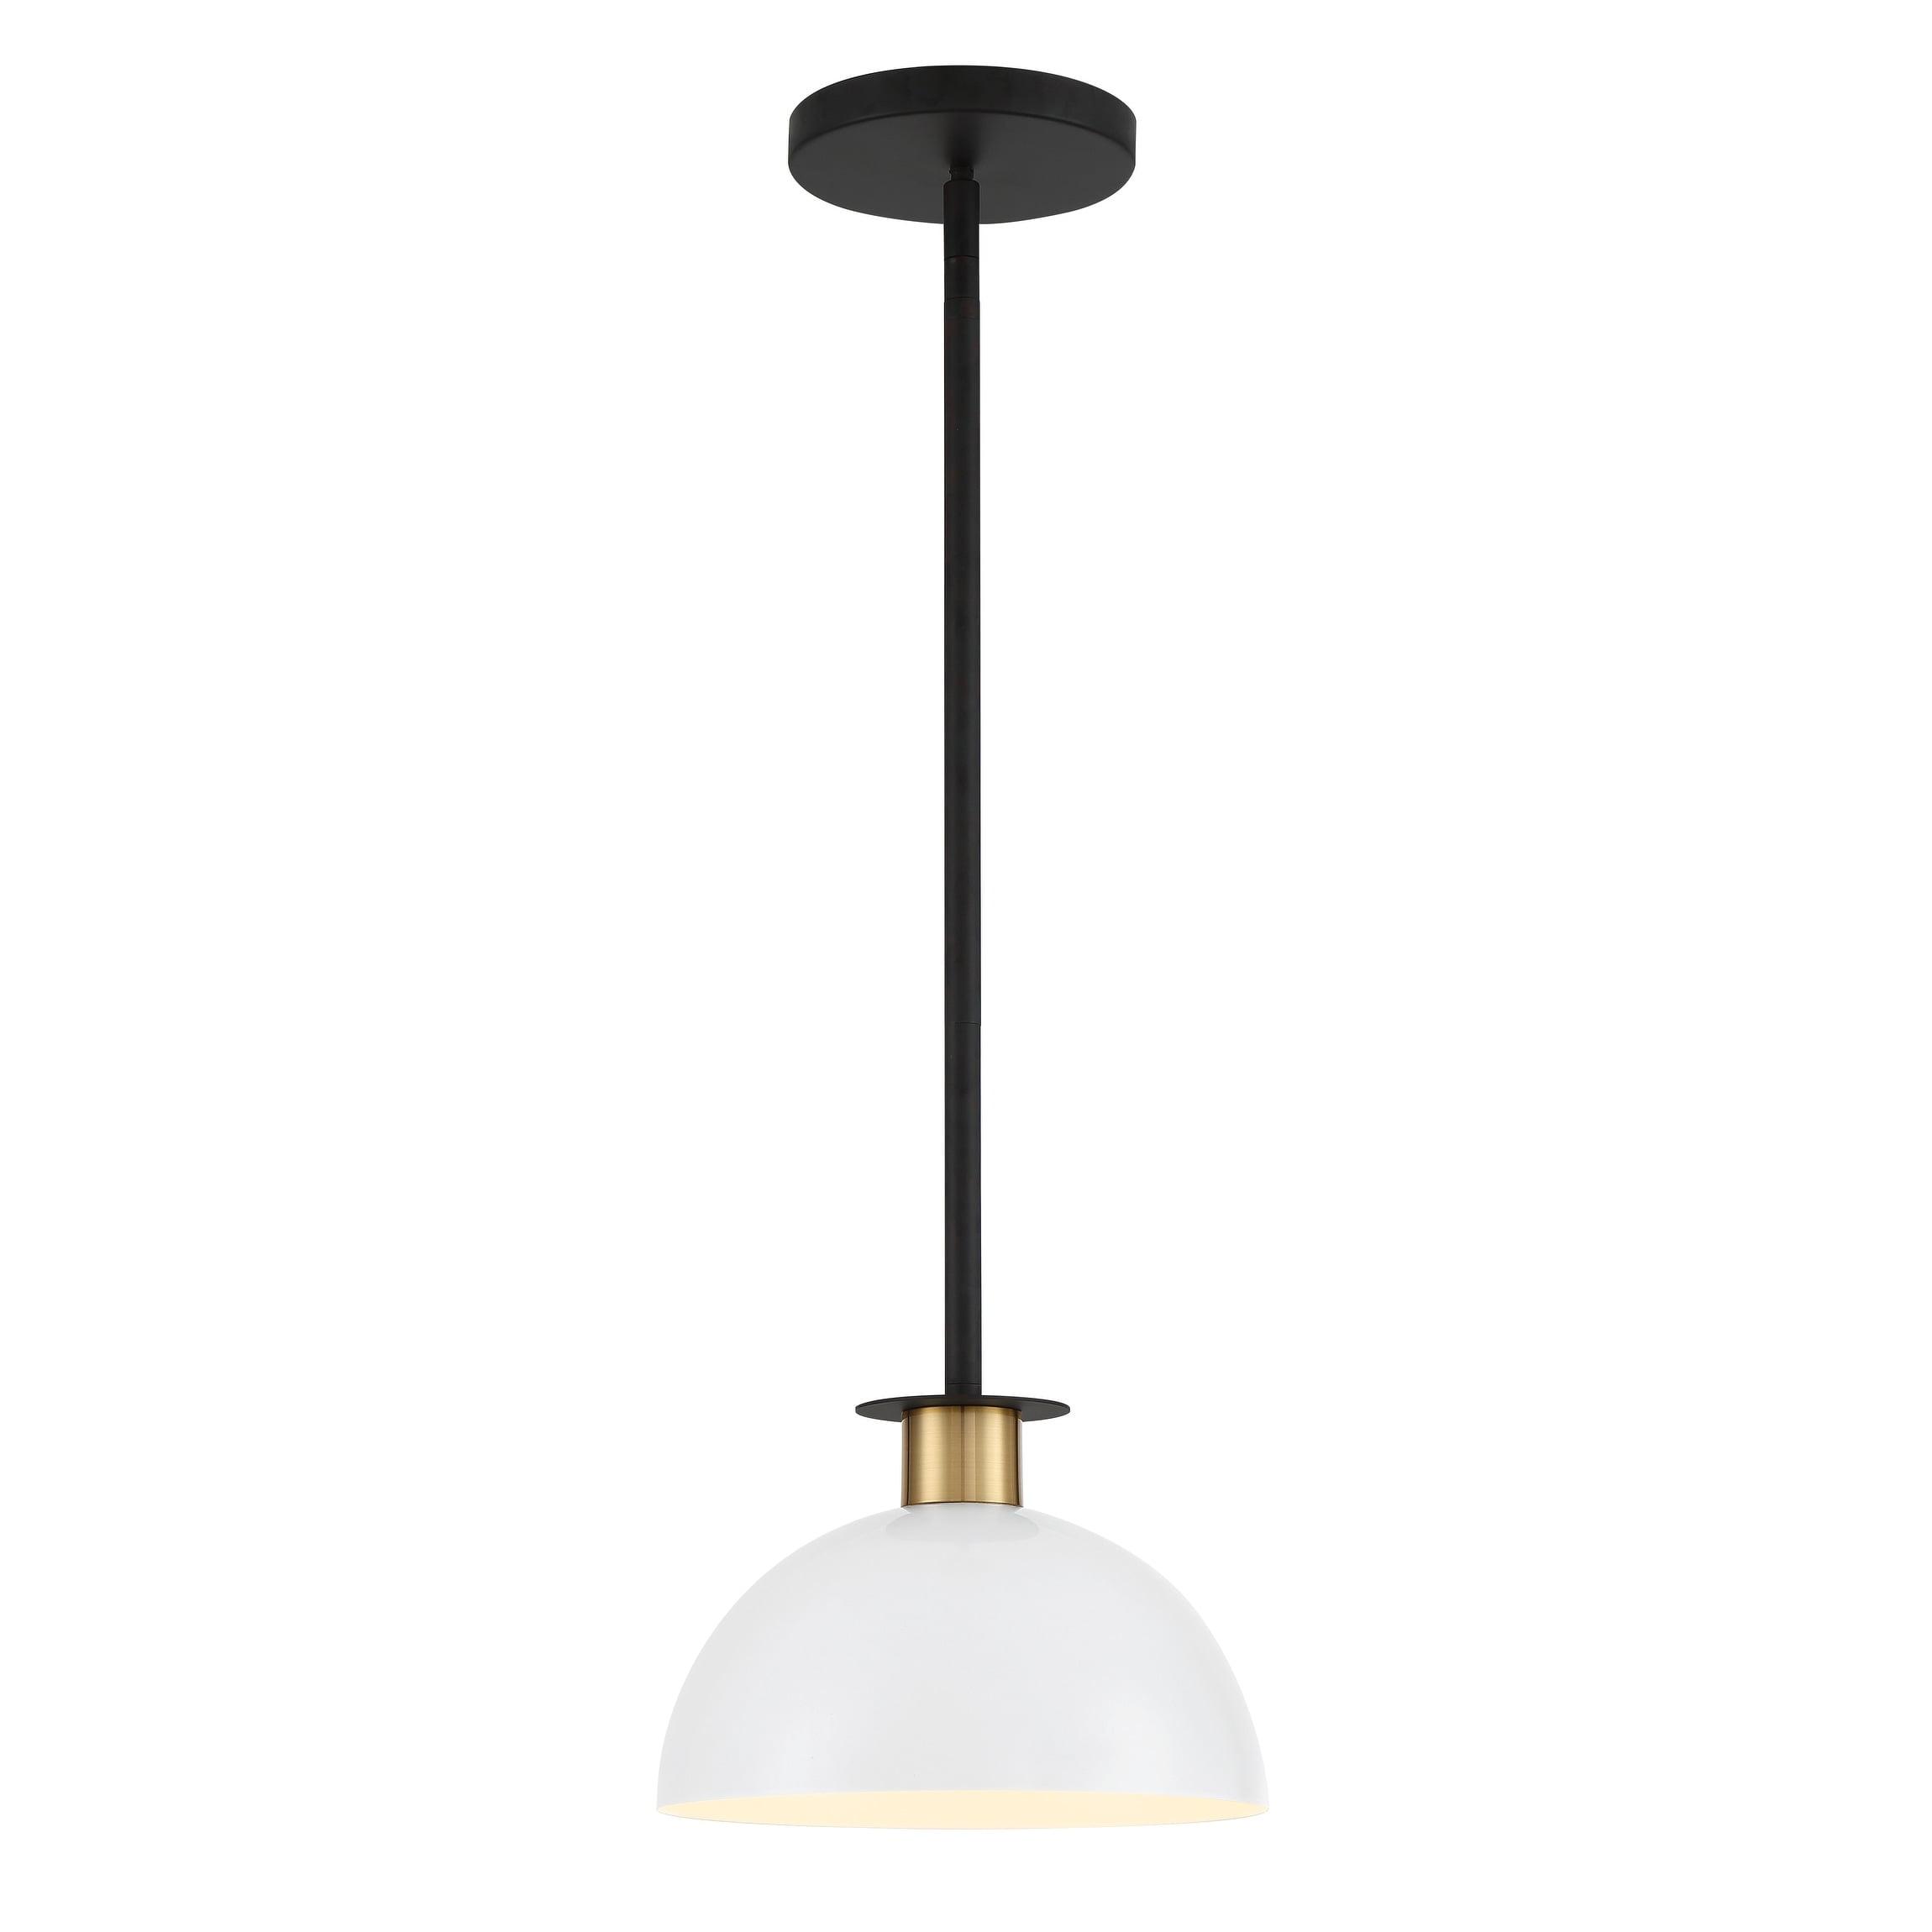 Gigi Mini Pendant in Matte Black and Aged Brass with White Shade